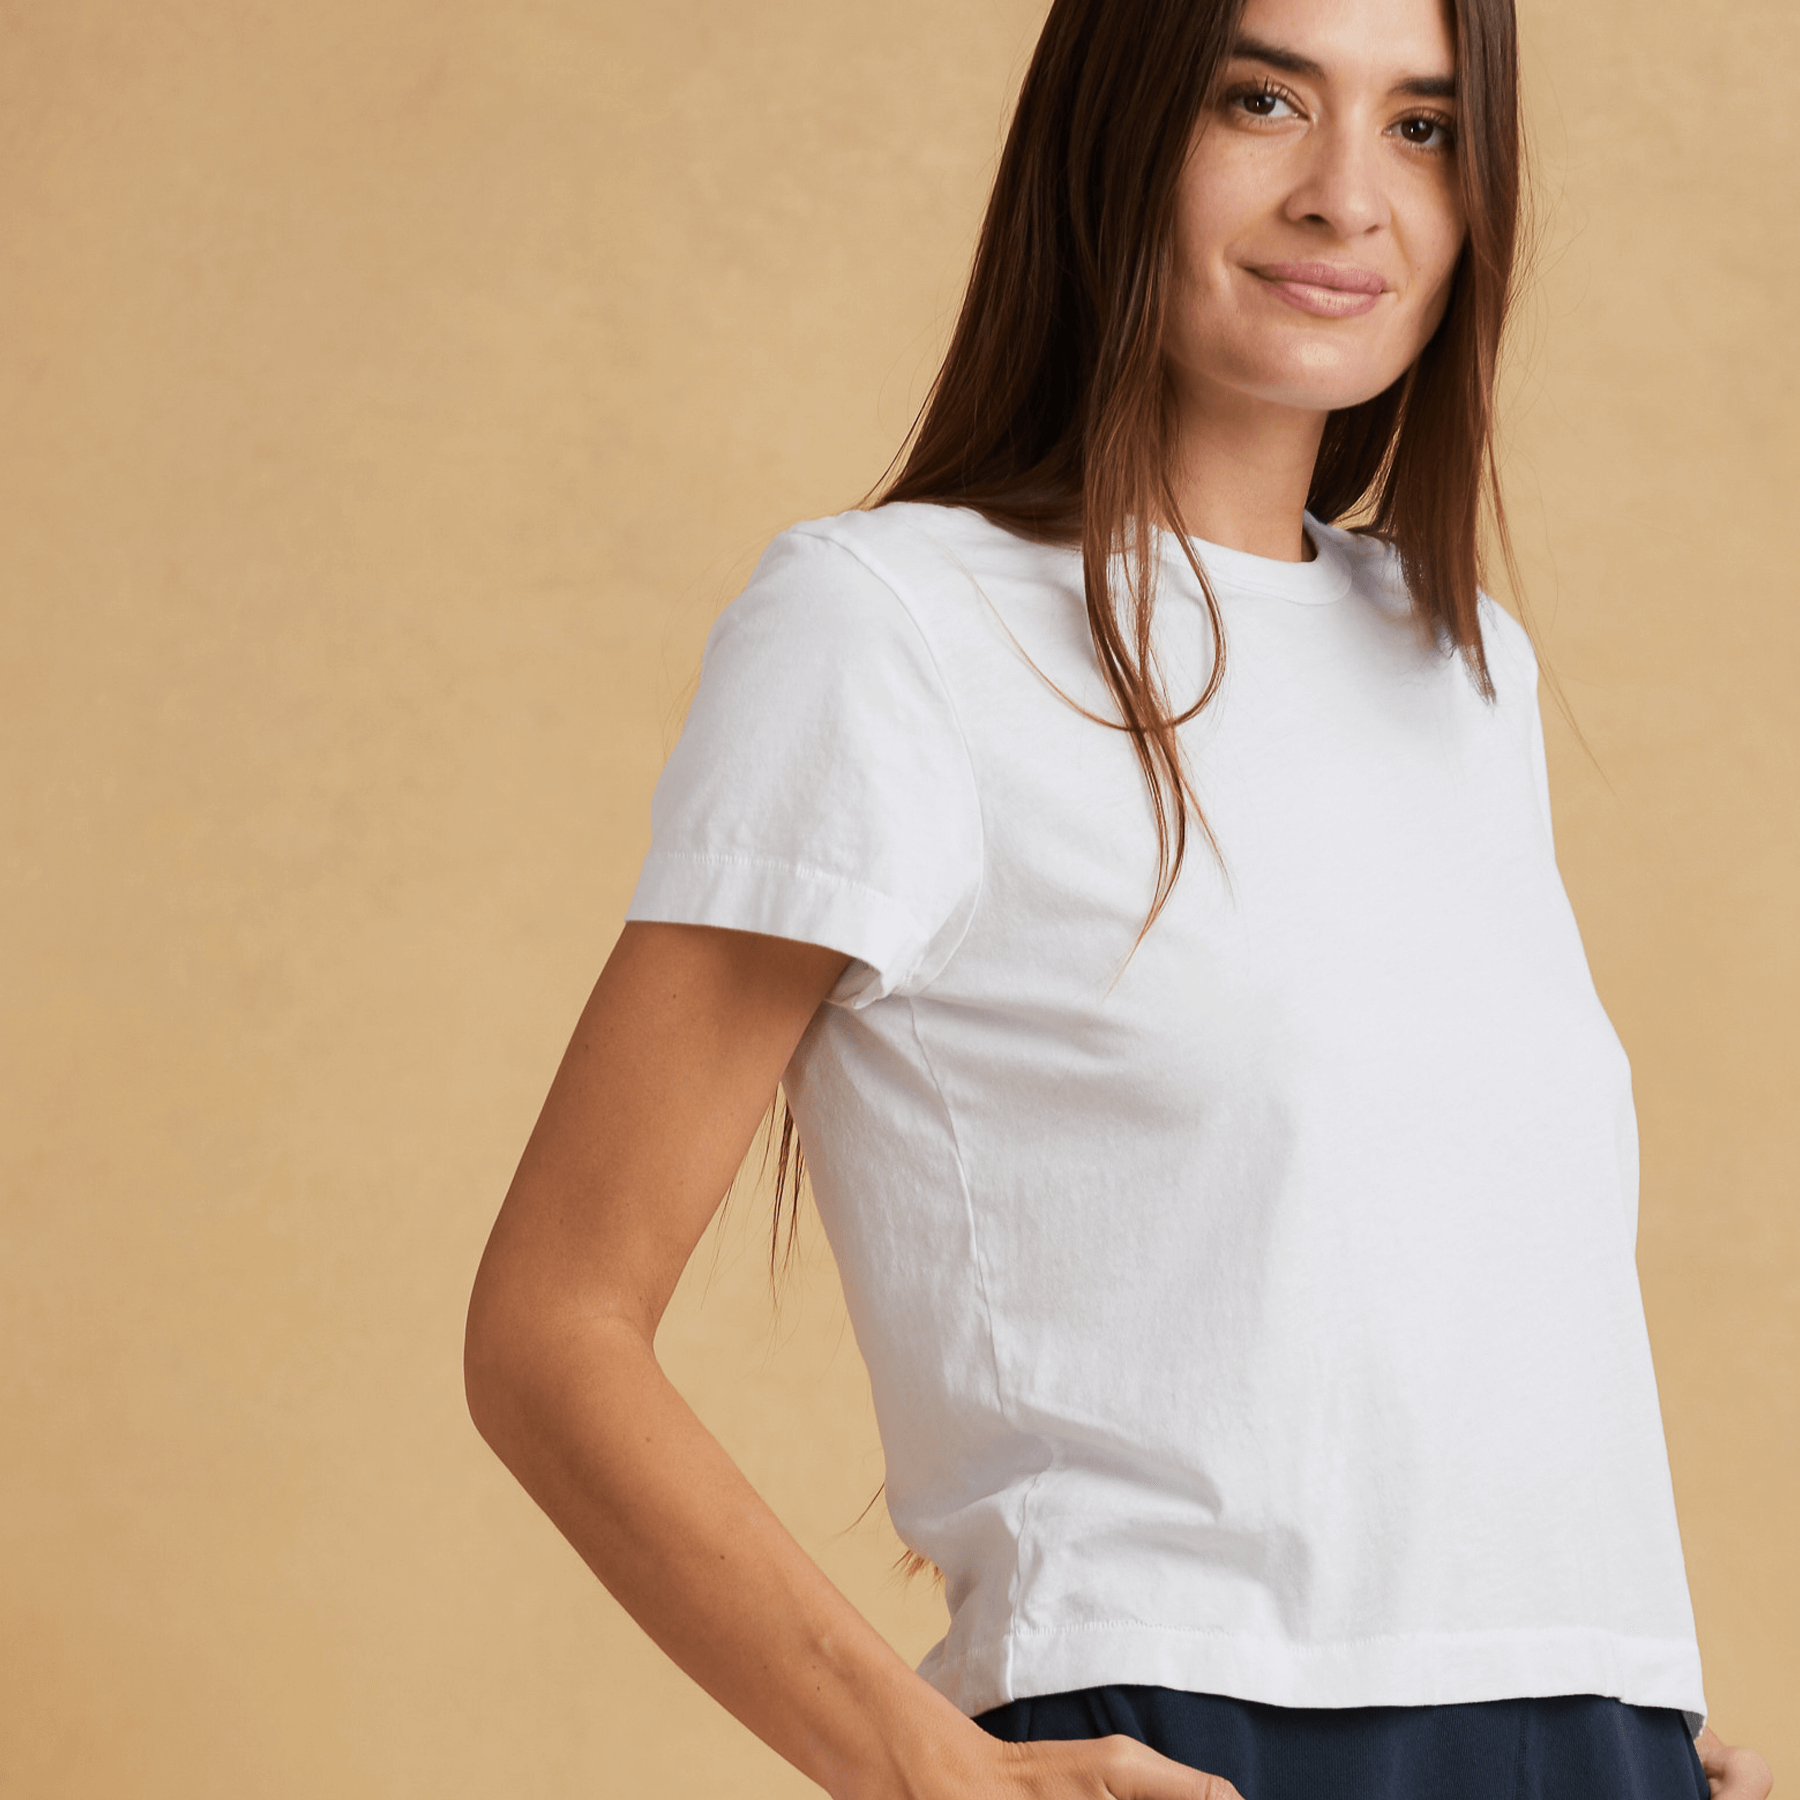 The Classic T-Shirt Company: Luxury Cotton T-Shirts for Sale